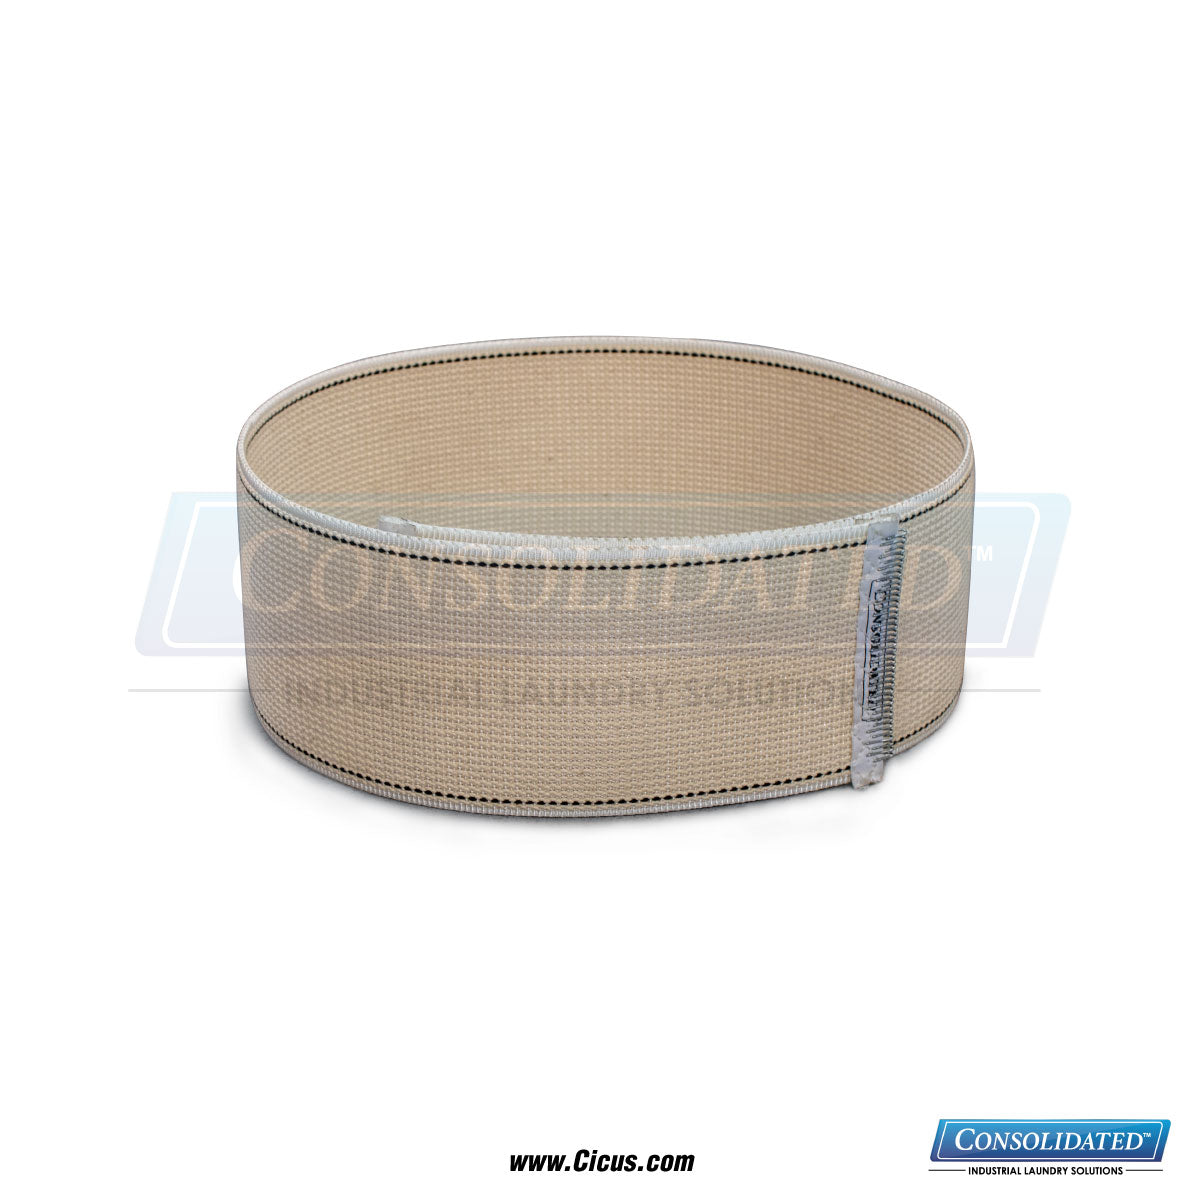 CIC Exclusive Chicago Dryer Canvas Ribbon - 2" x 101" (1001-025)